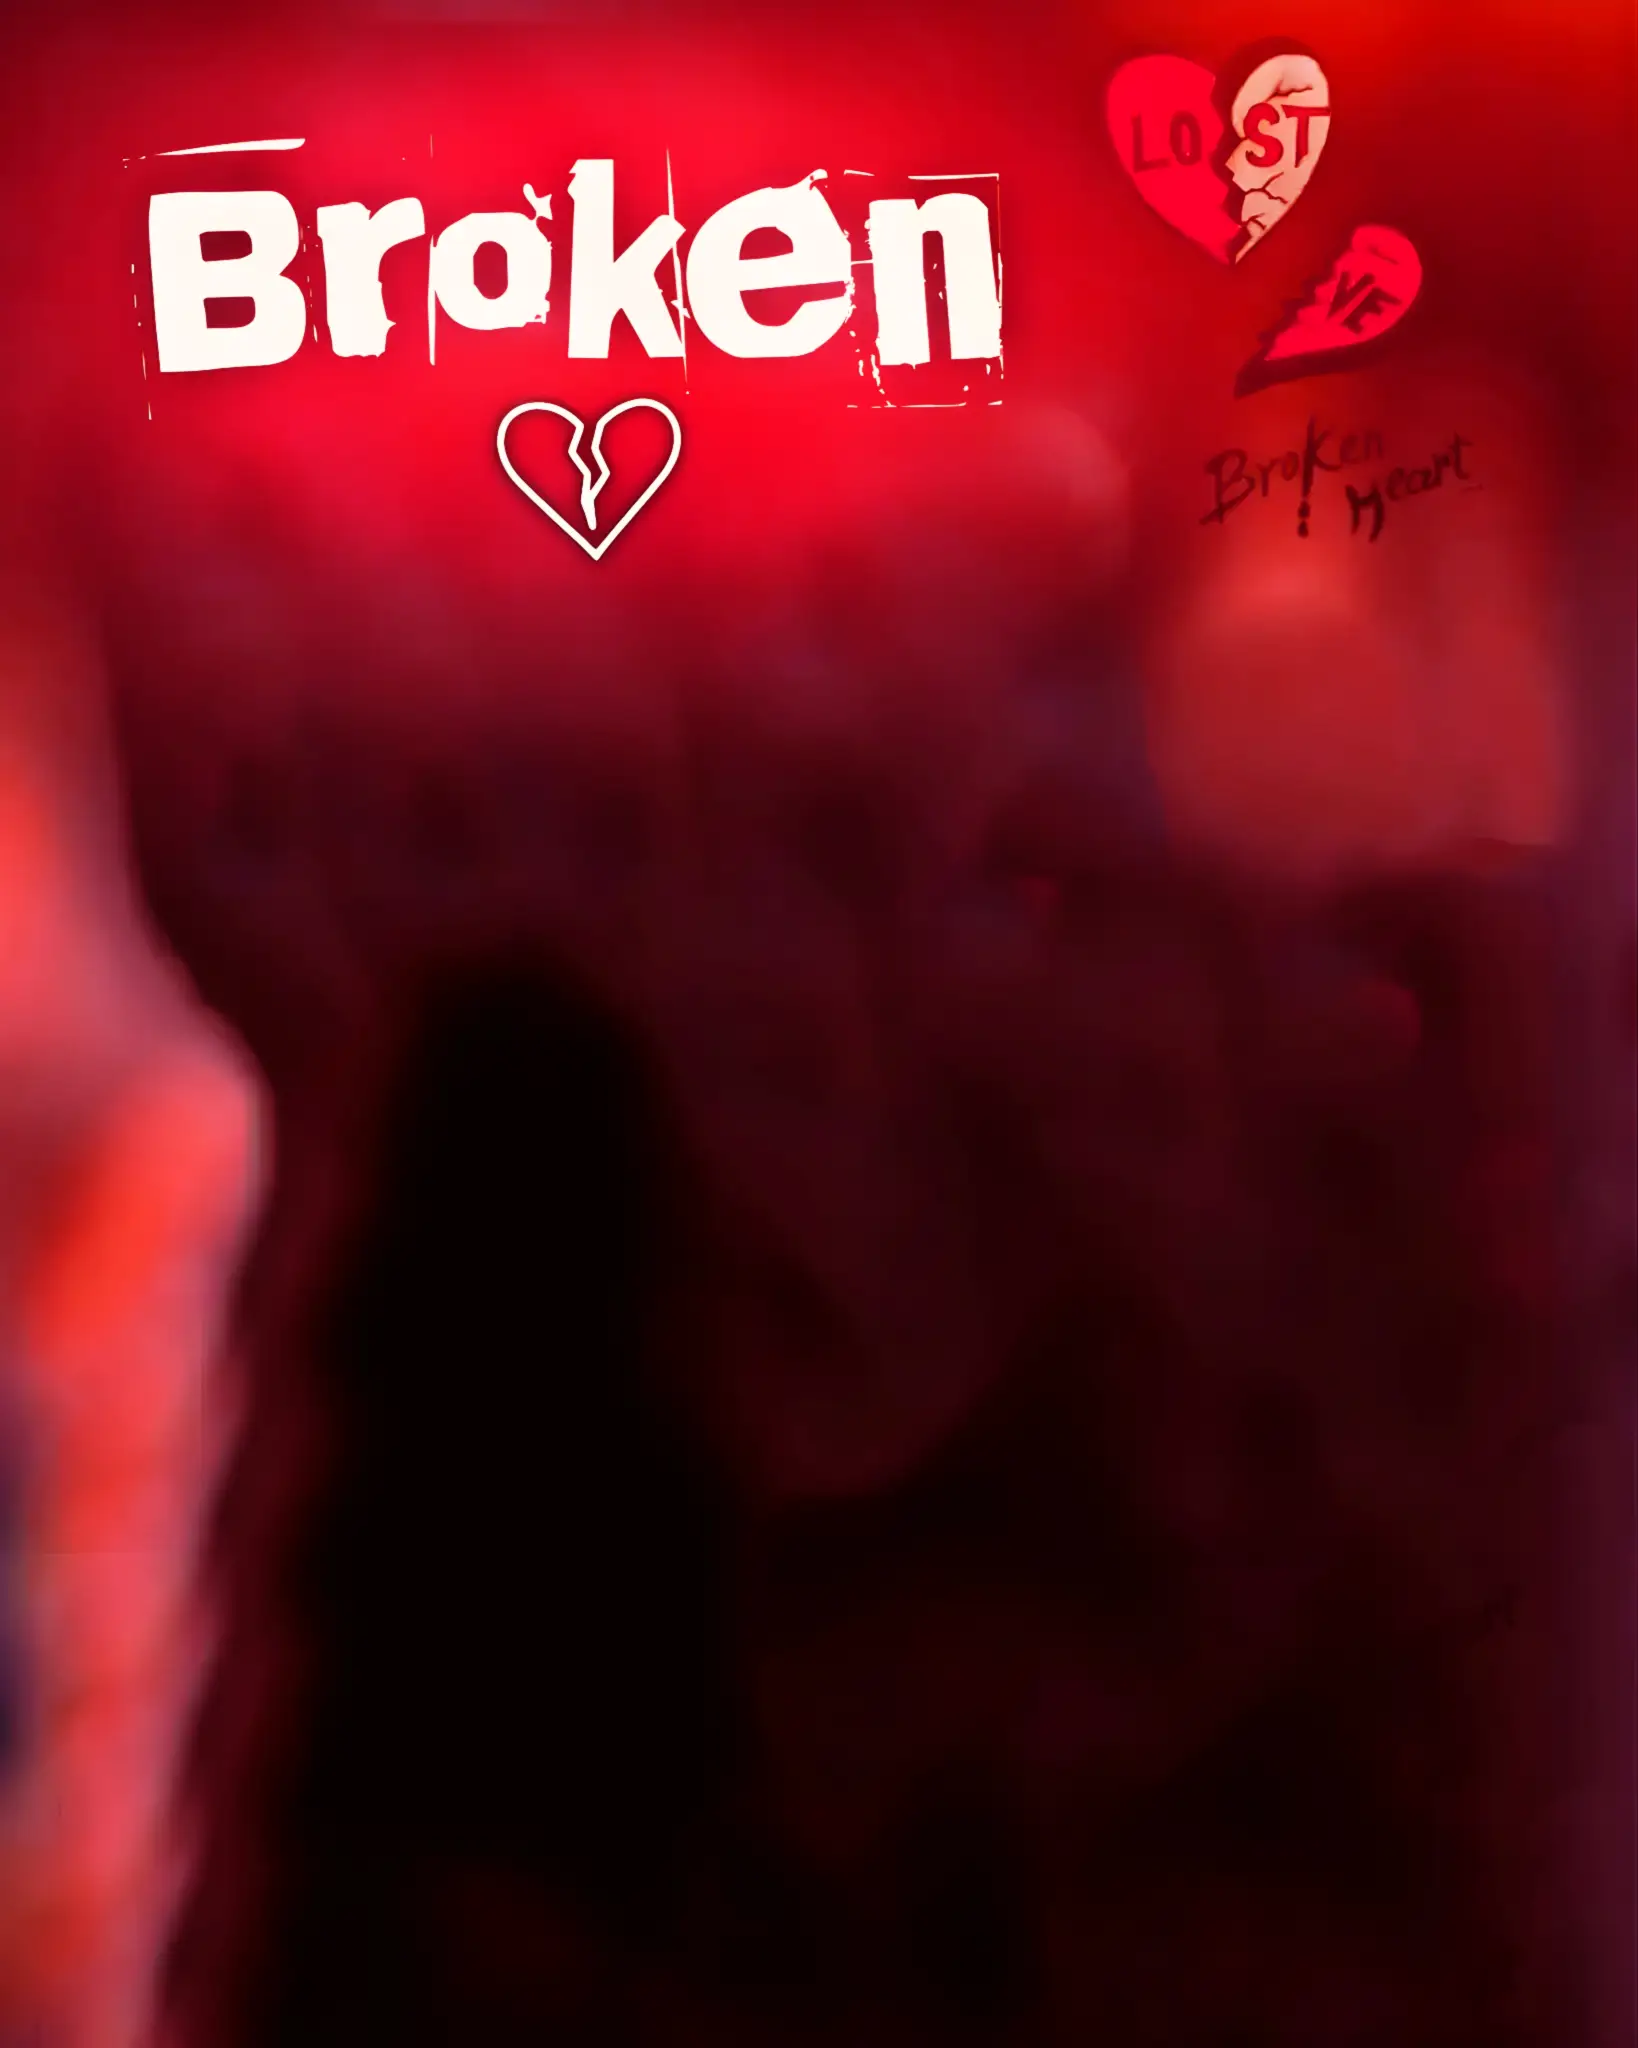 You are currently viewing Broken heart cb hd background download